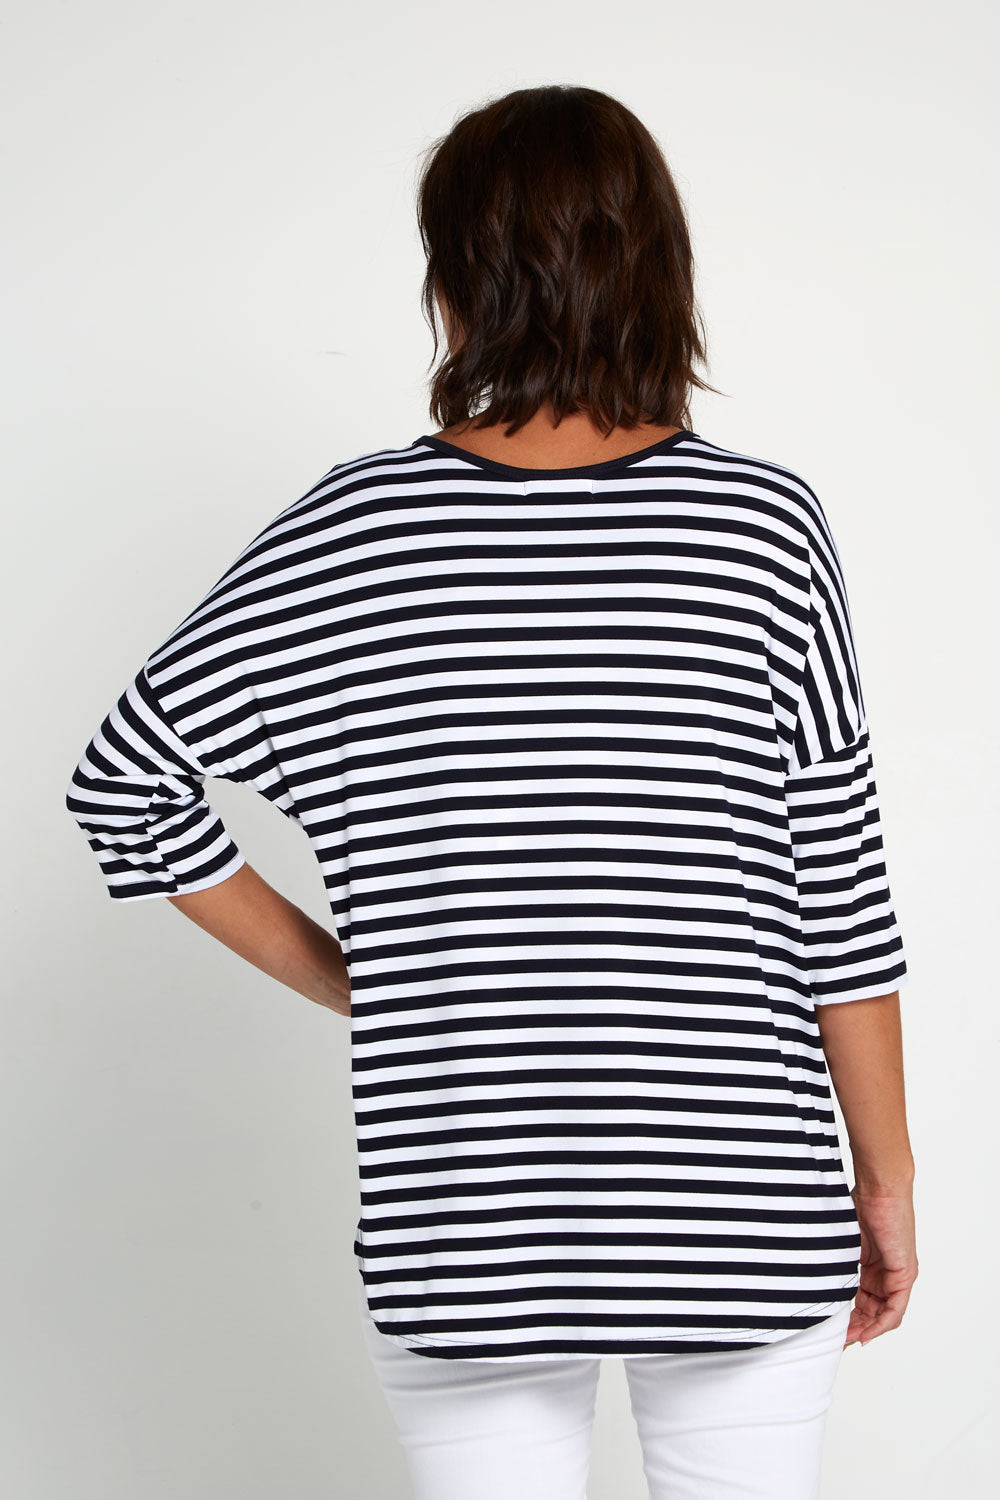 Montmartre Bamboo Top - Navy White Stripe